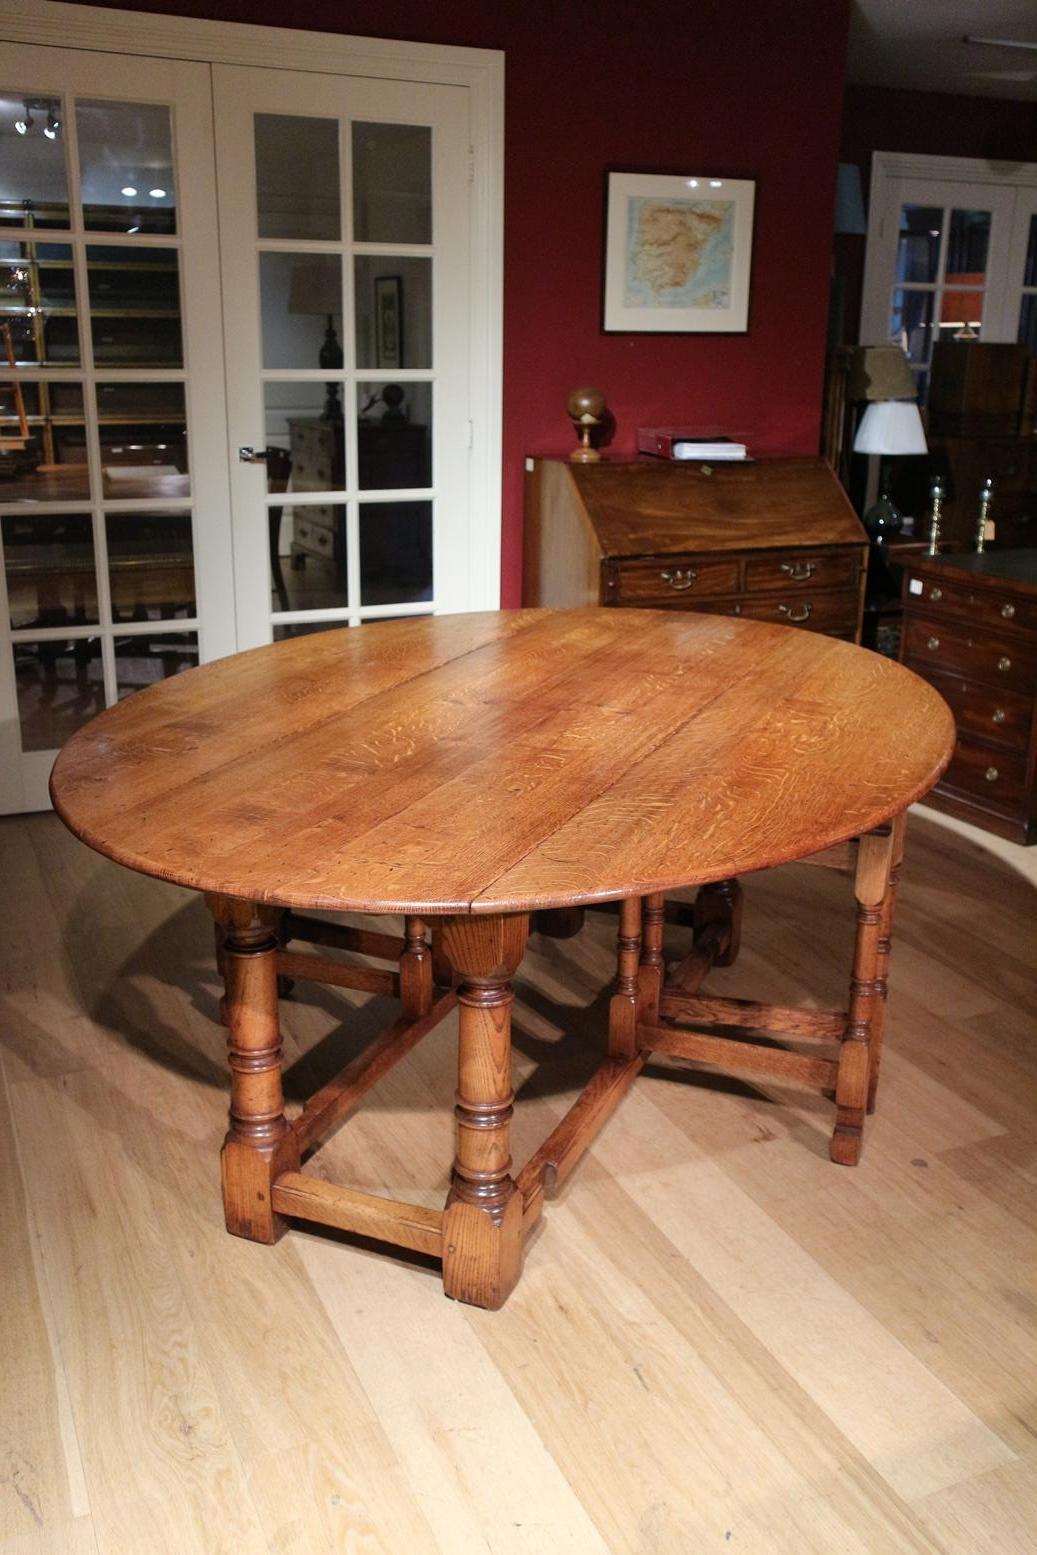 Oak drop leaf table in perfect condition. Beautiful large oval table. Both sides can be folded down.

Origin: England

Period: 20th century

Size: 201cm x 148cm x h.77cm